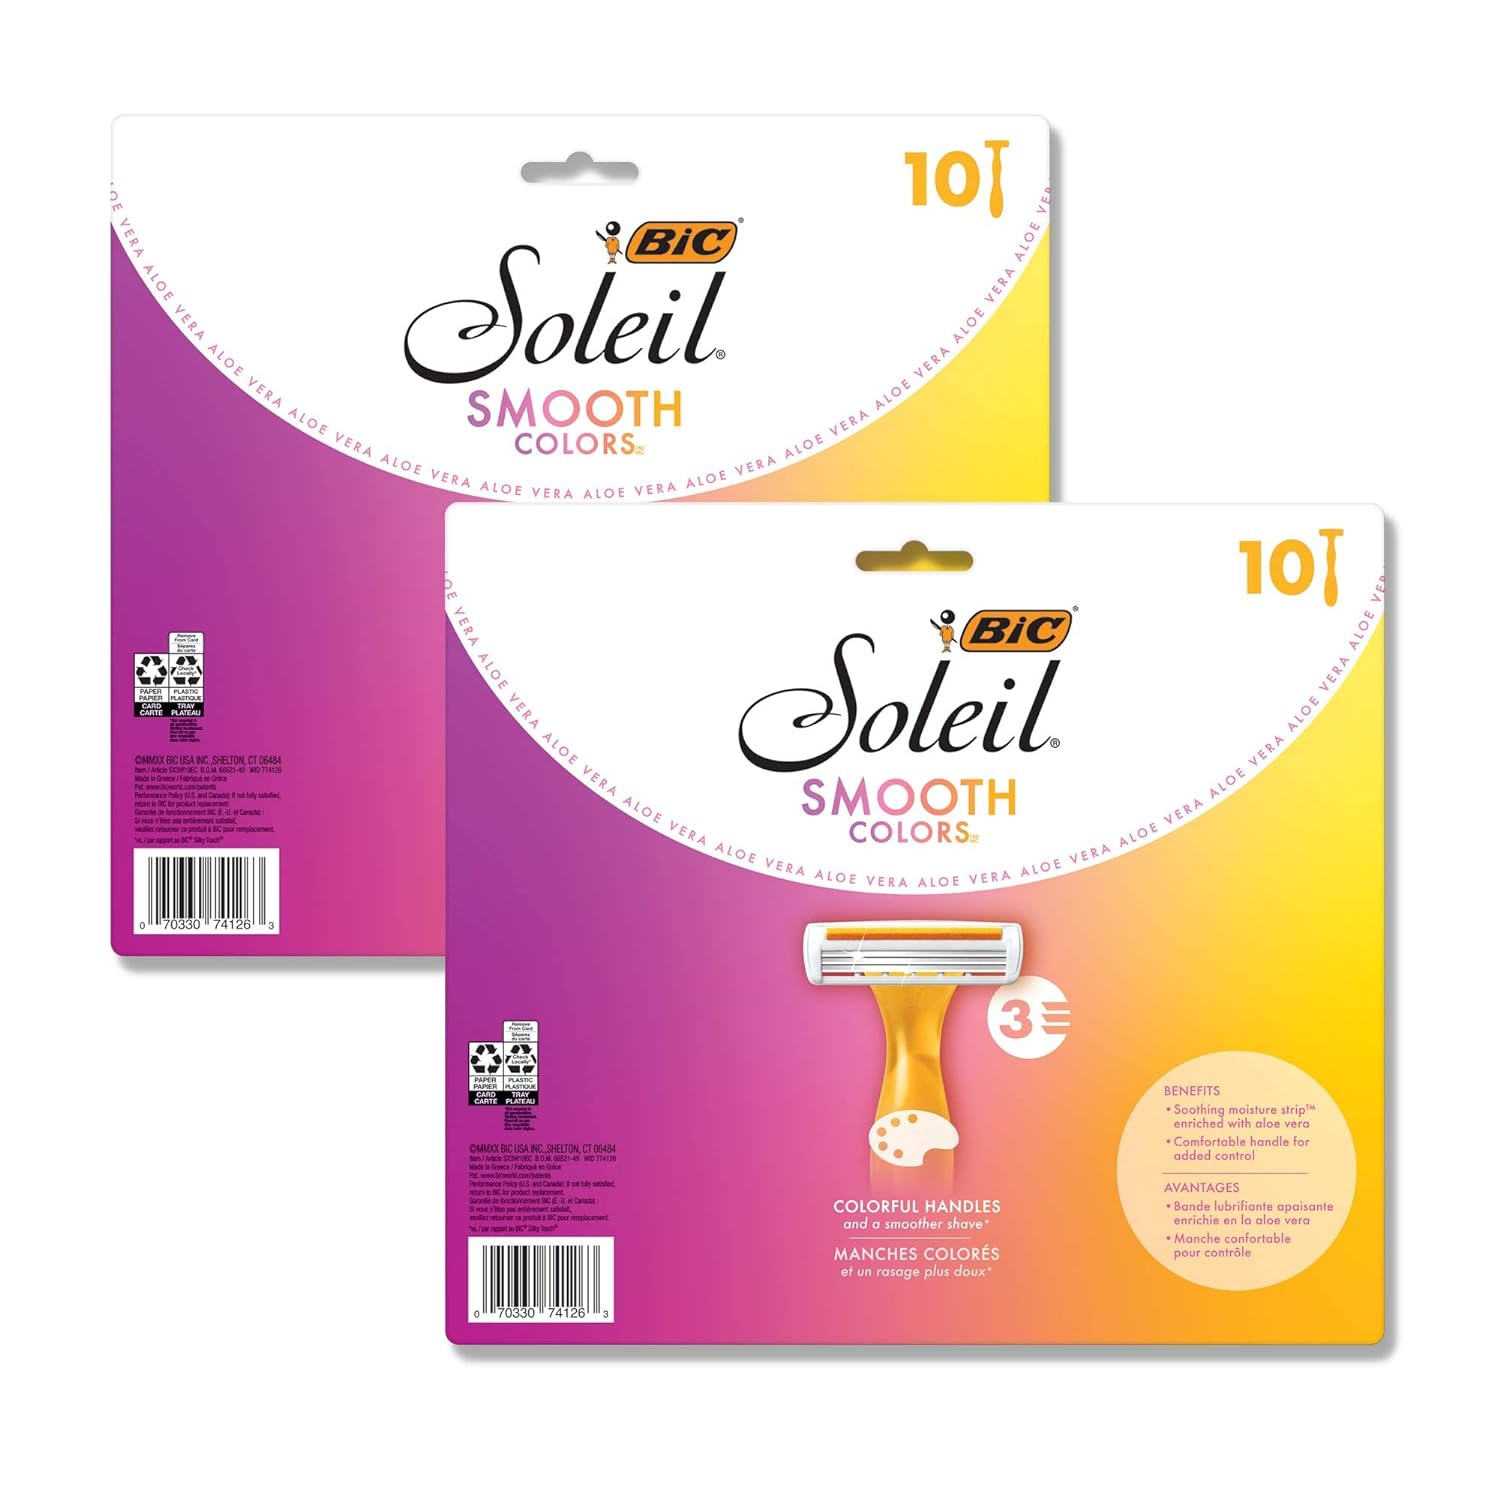 BIC Soleil Smooth Colors Razors with Aloe Vera and Vitamin E Lubricating Disposable Razors for Women, 20-Count, 3 Blades